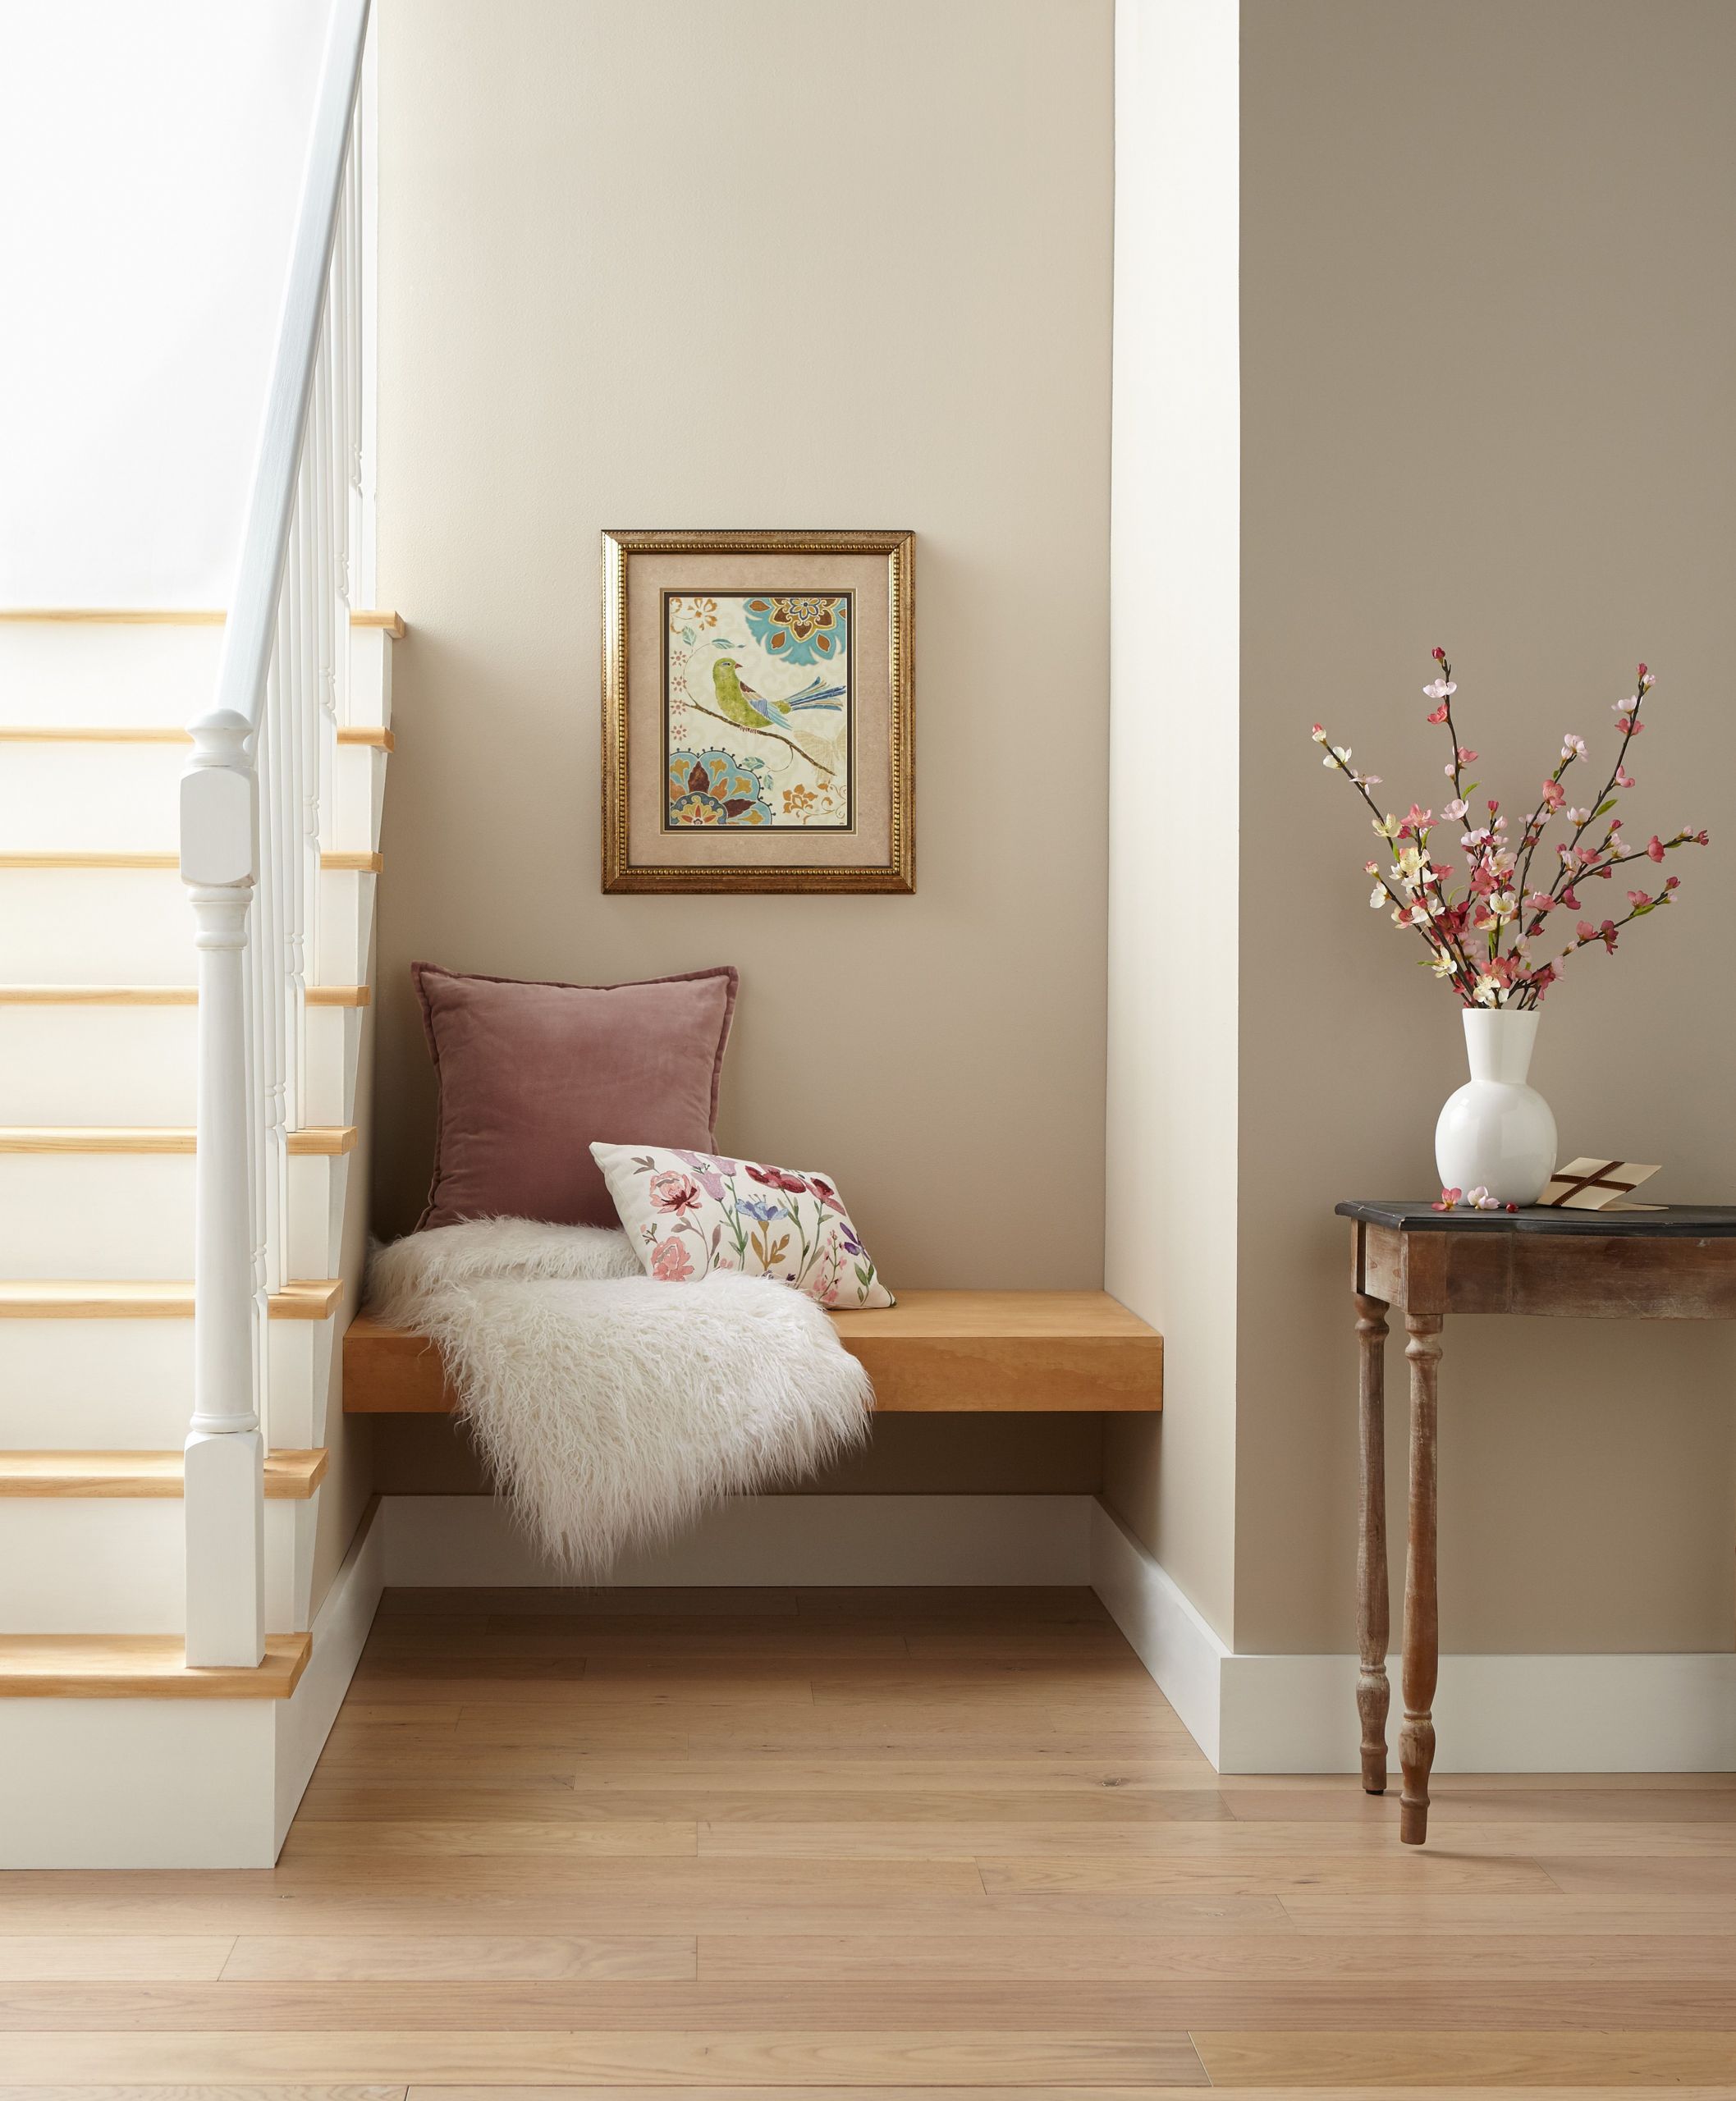 Trending Paint Colors For Bedrooms
 These Are the Paint Color Trends for 2020 According to Behr